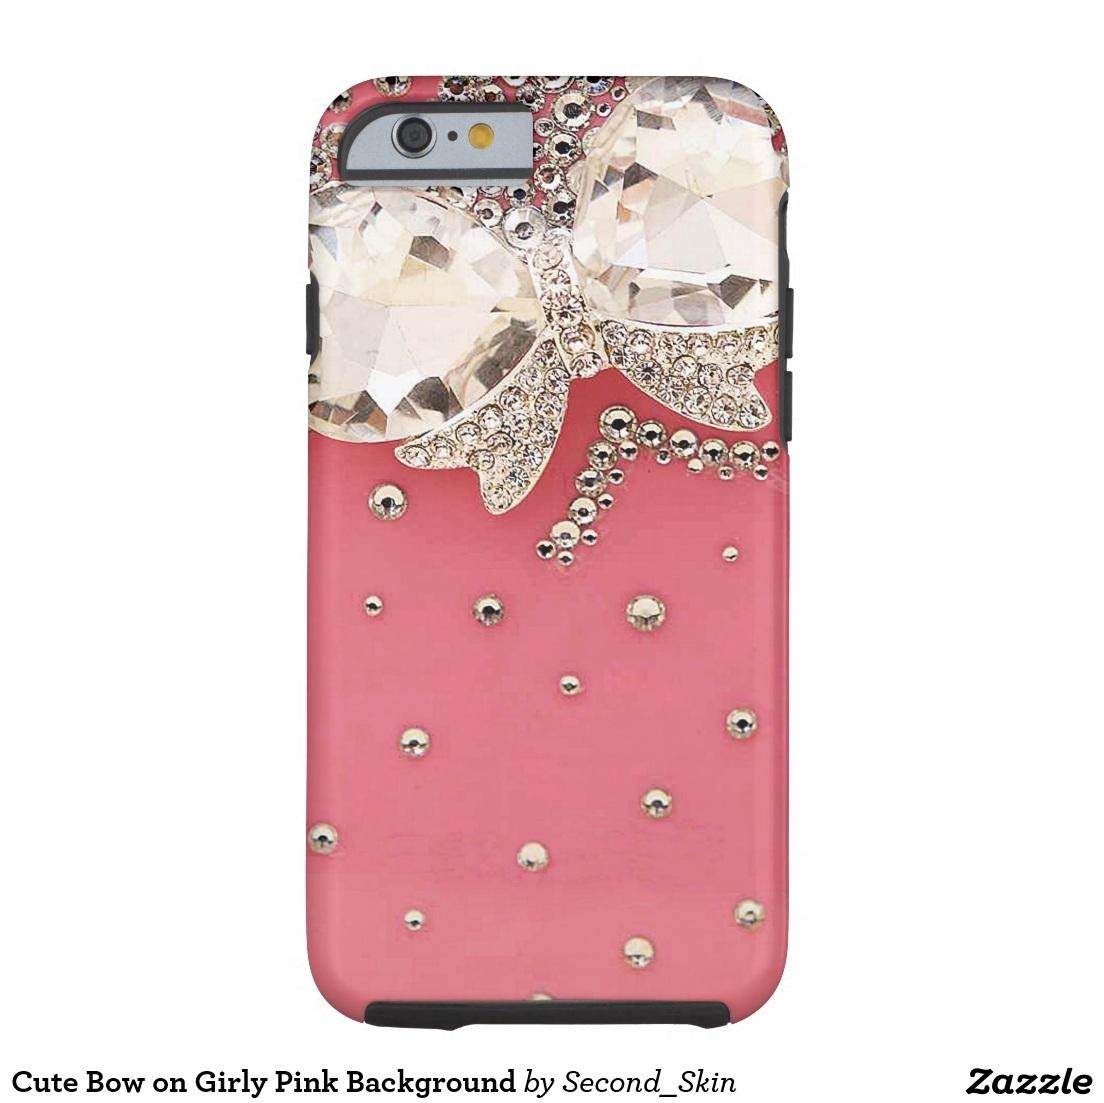 Cute Bow On Girly Pink Background Case Rf Ada Cbb De Zzs Frlv